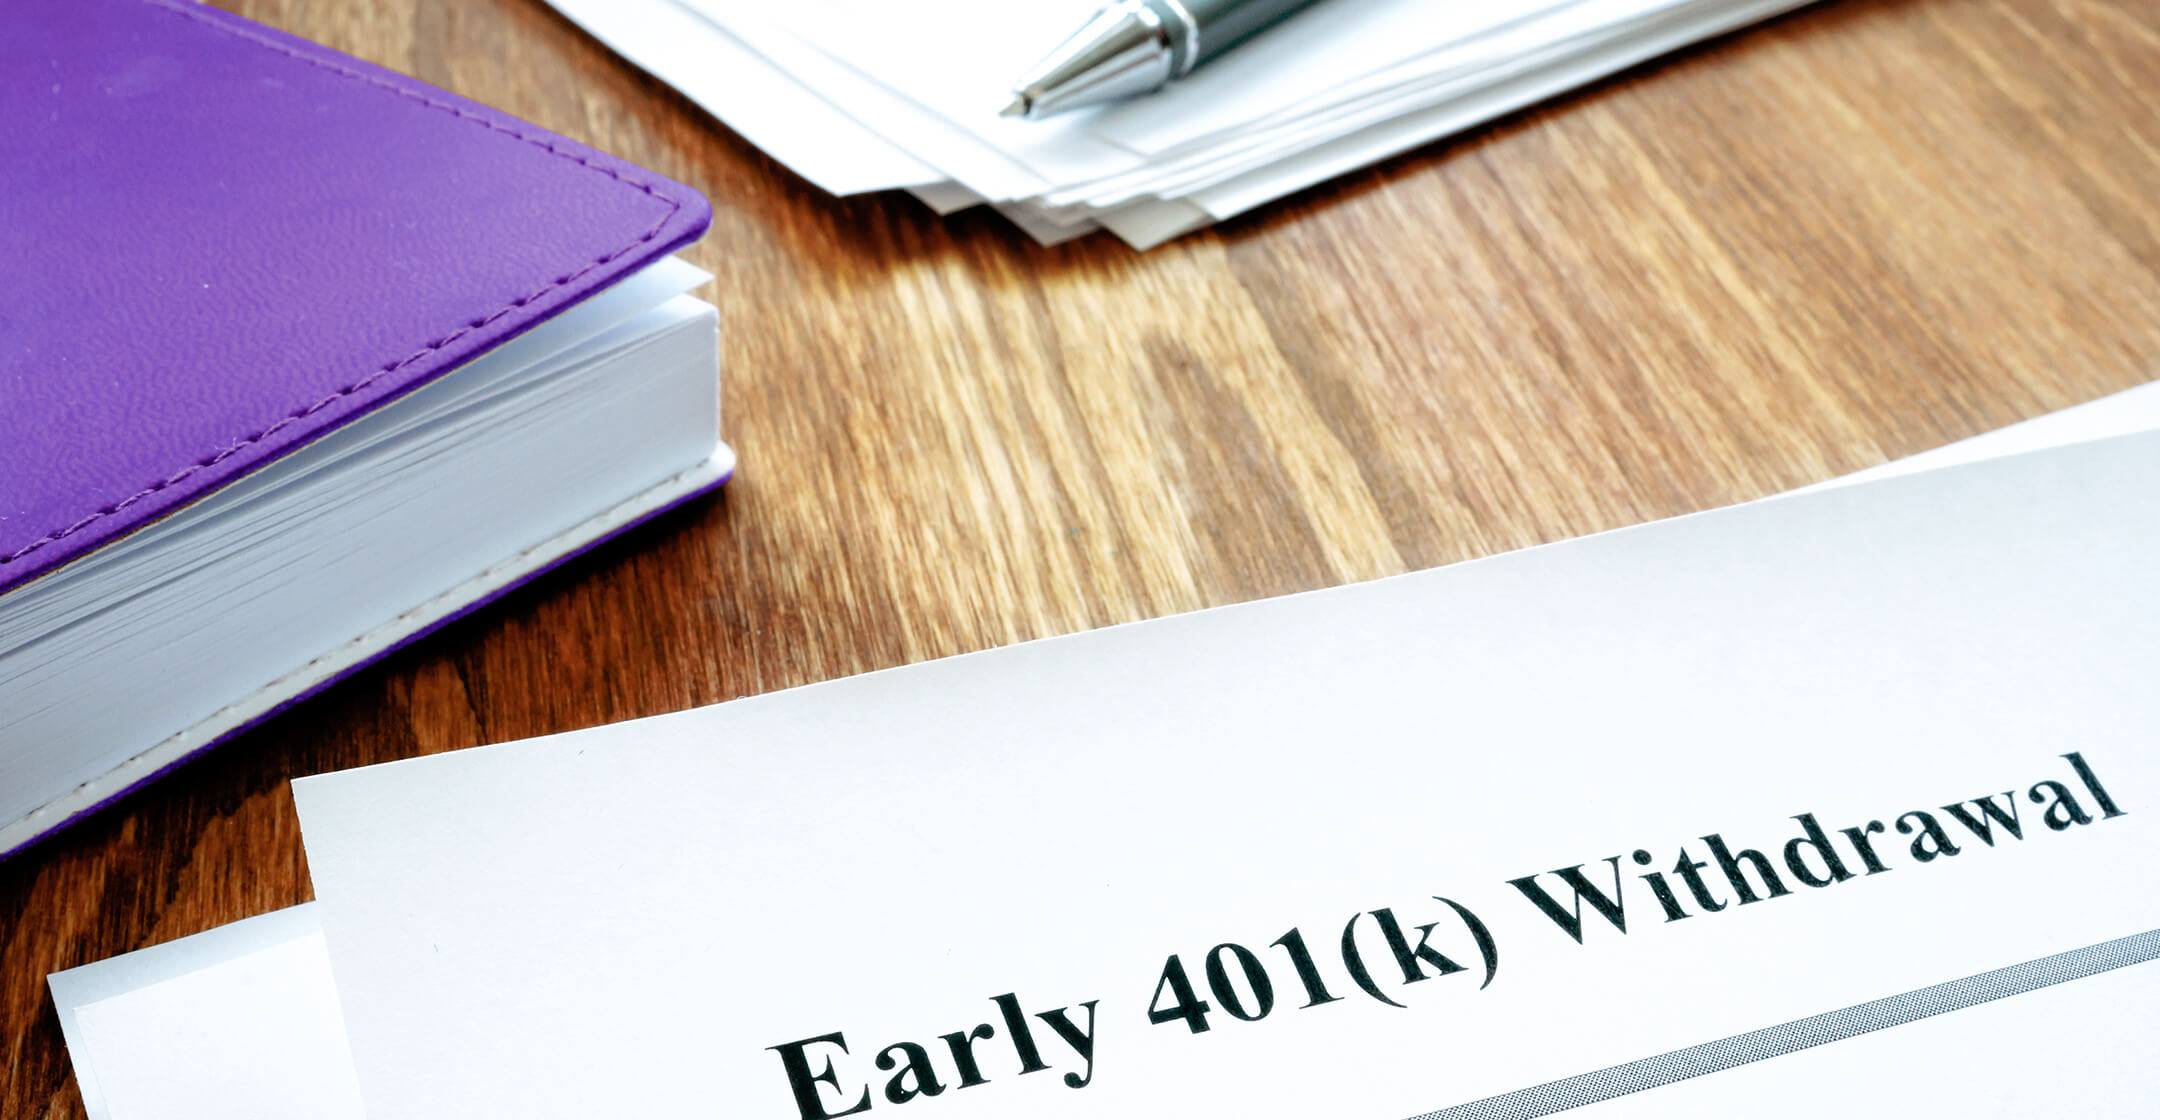 Covid Relief 401k Withdrawals in 2021